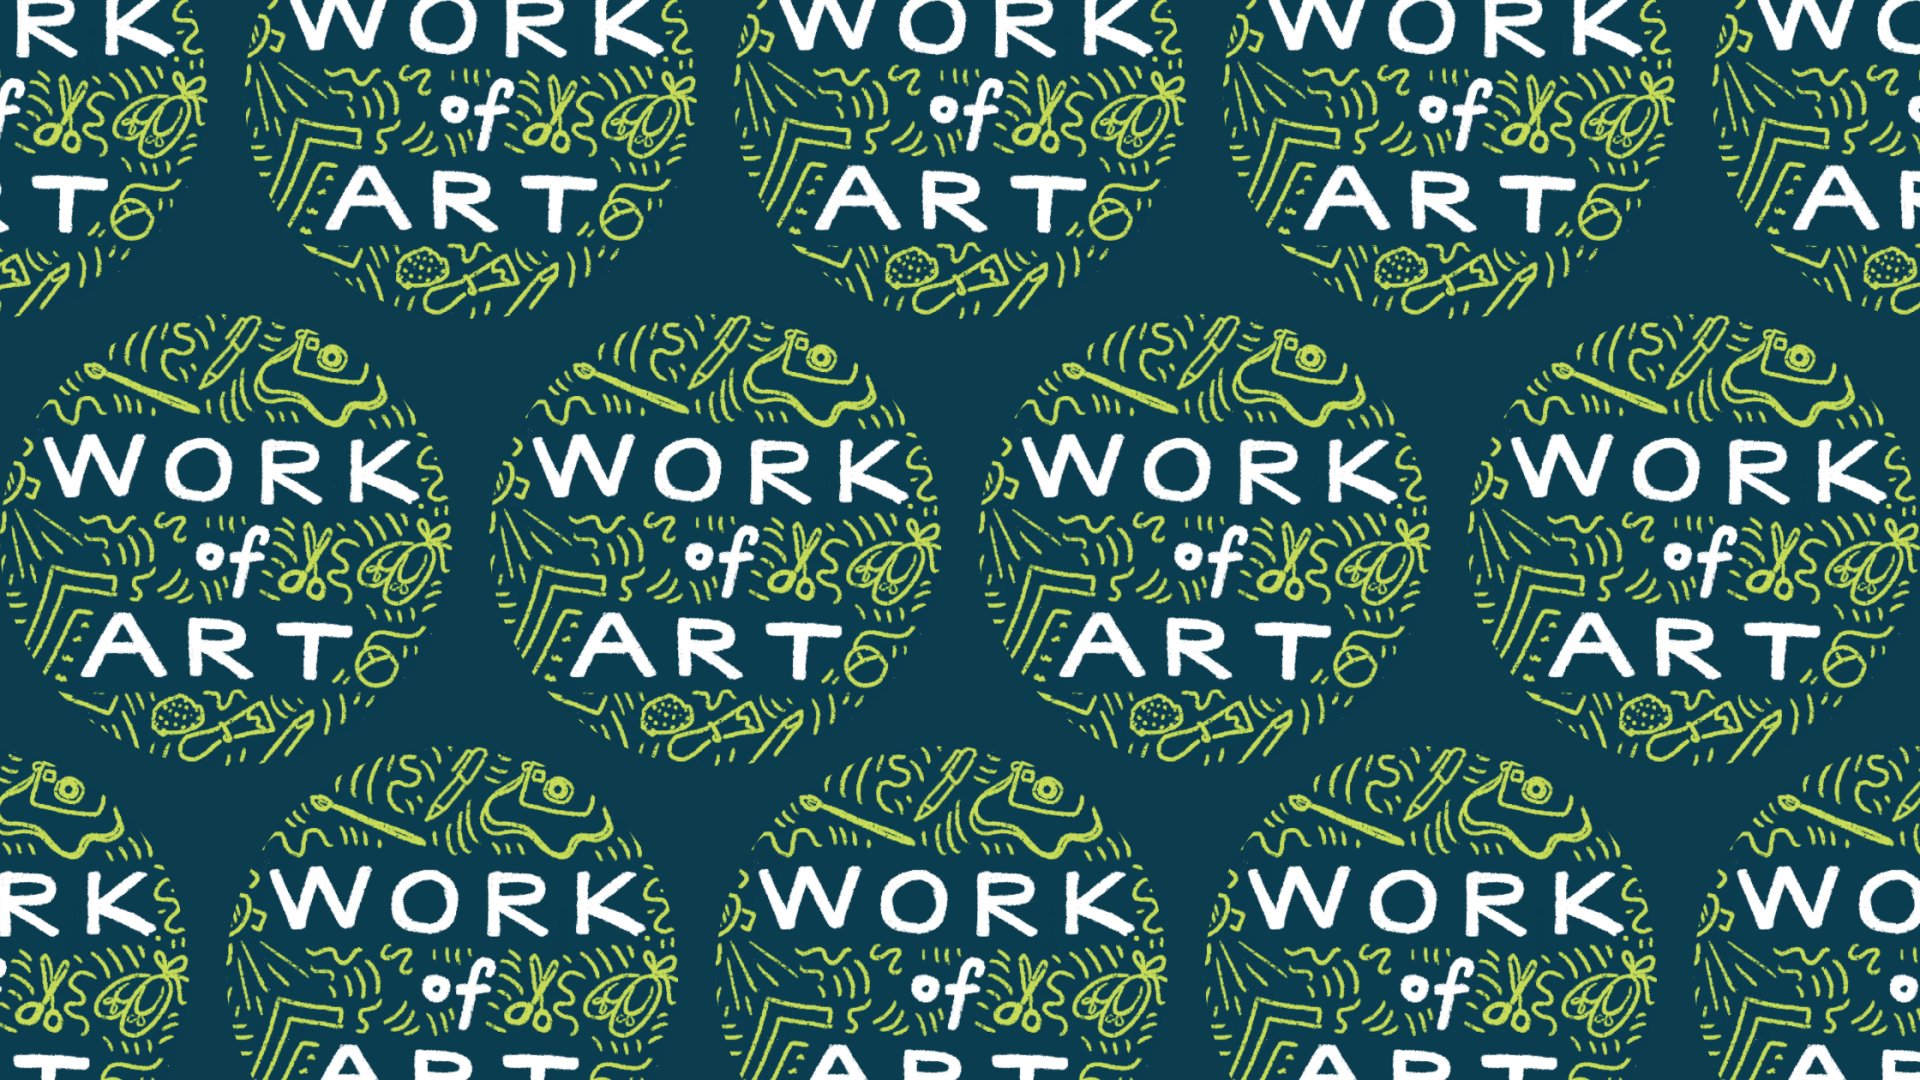 A banner featuring the "Work of Art: Business Skills for Artists" logo